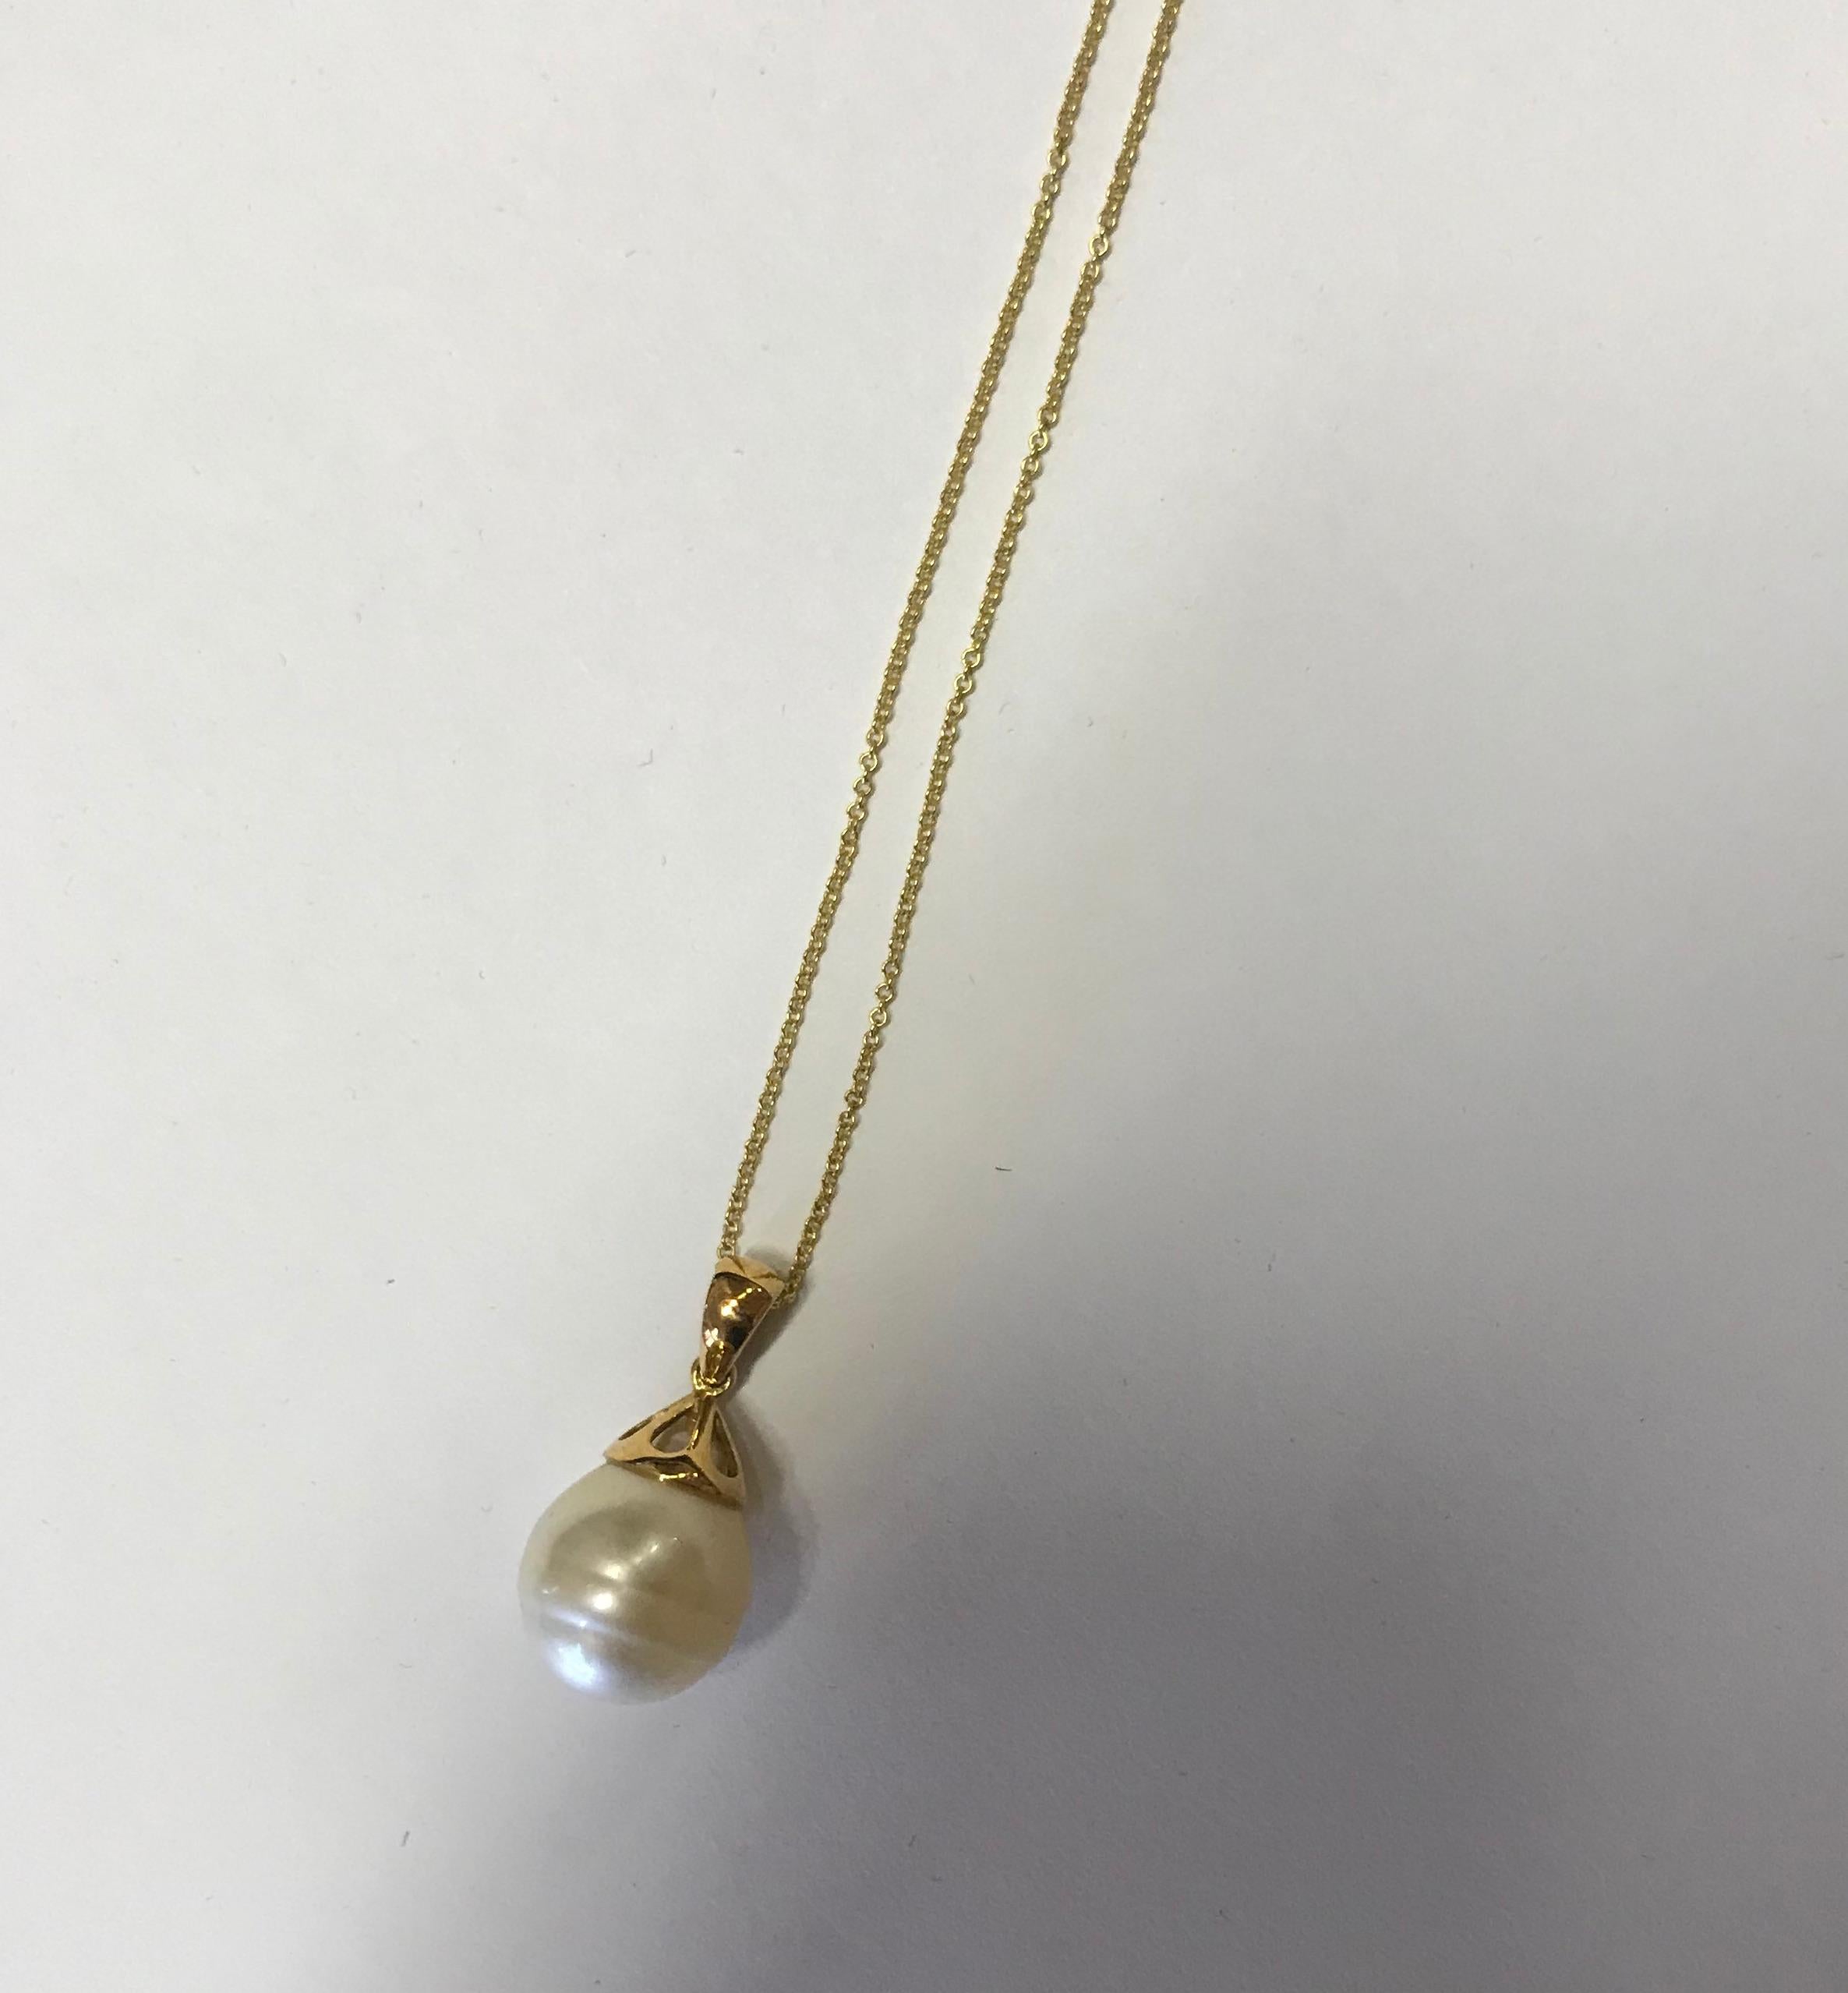 Contemporary White Natural Pearl Pendant Necklace Chain 18k Yellow Gold Open Bail Design For Sale